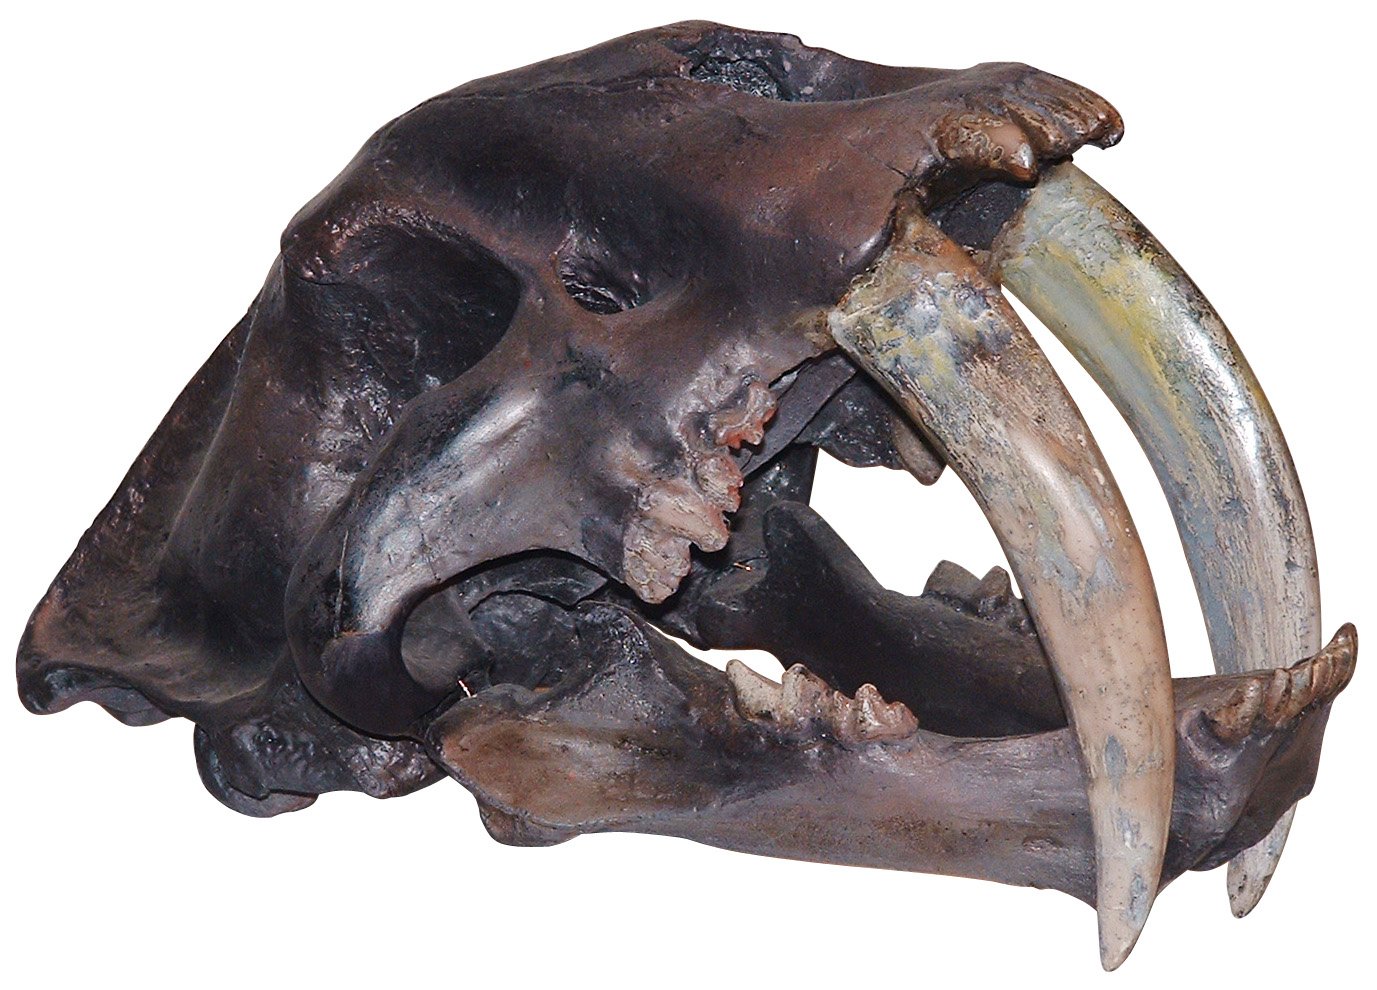 the skull of a dinosaur with large tusks